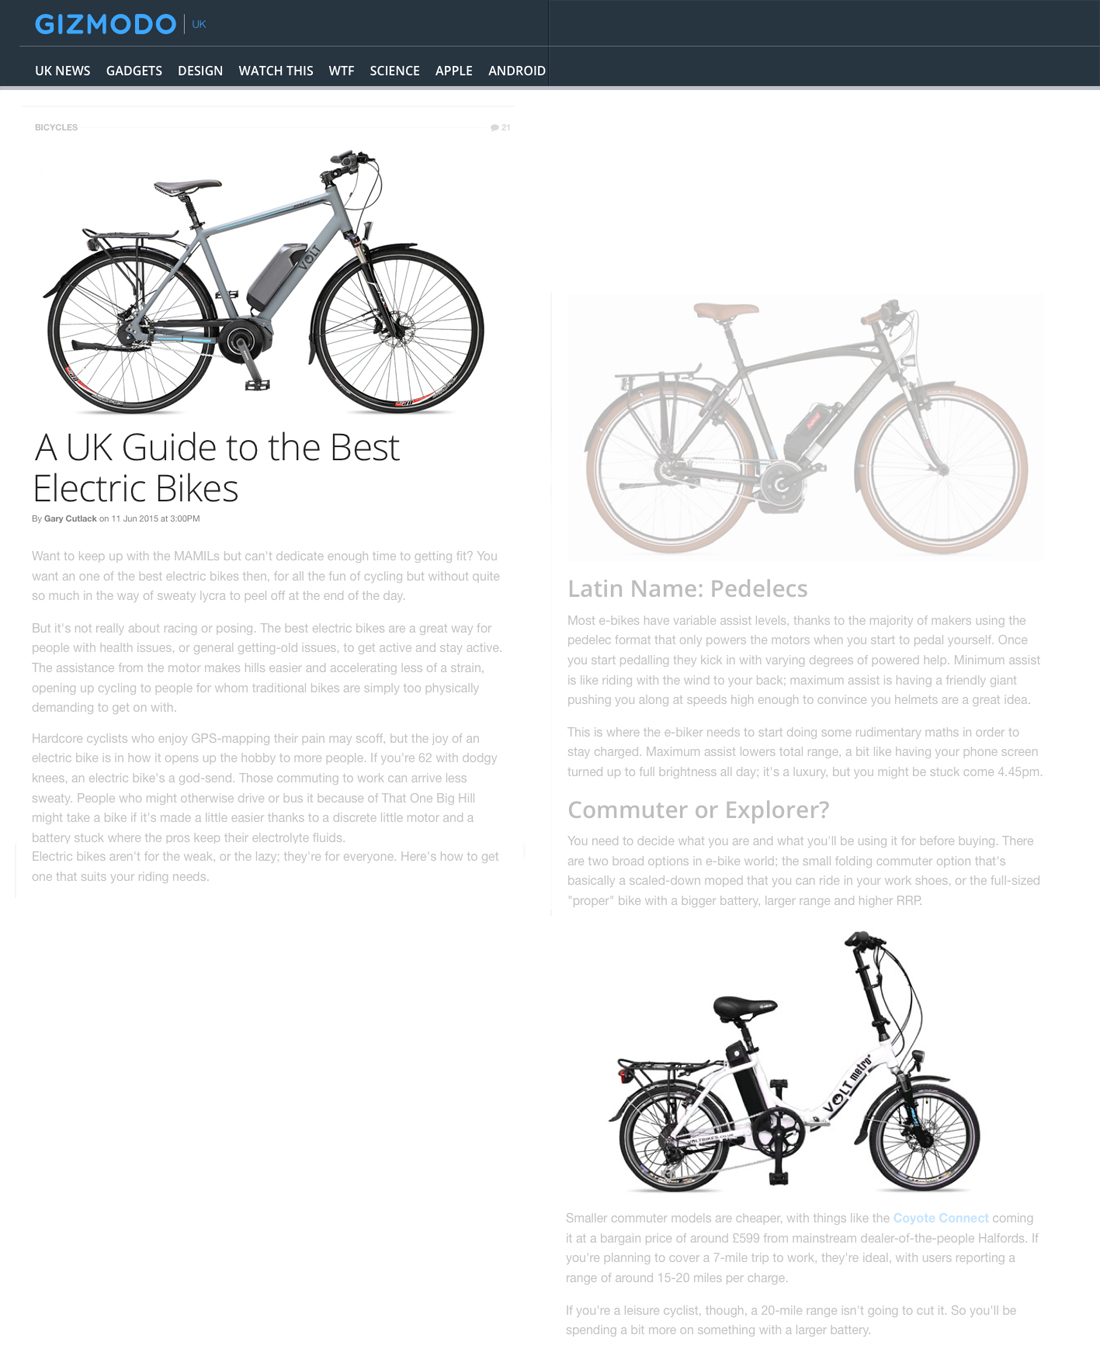 VOLT e-bikes: infinity and metro featured in Gizmodo article